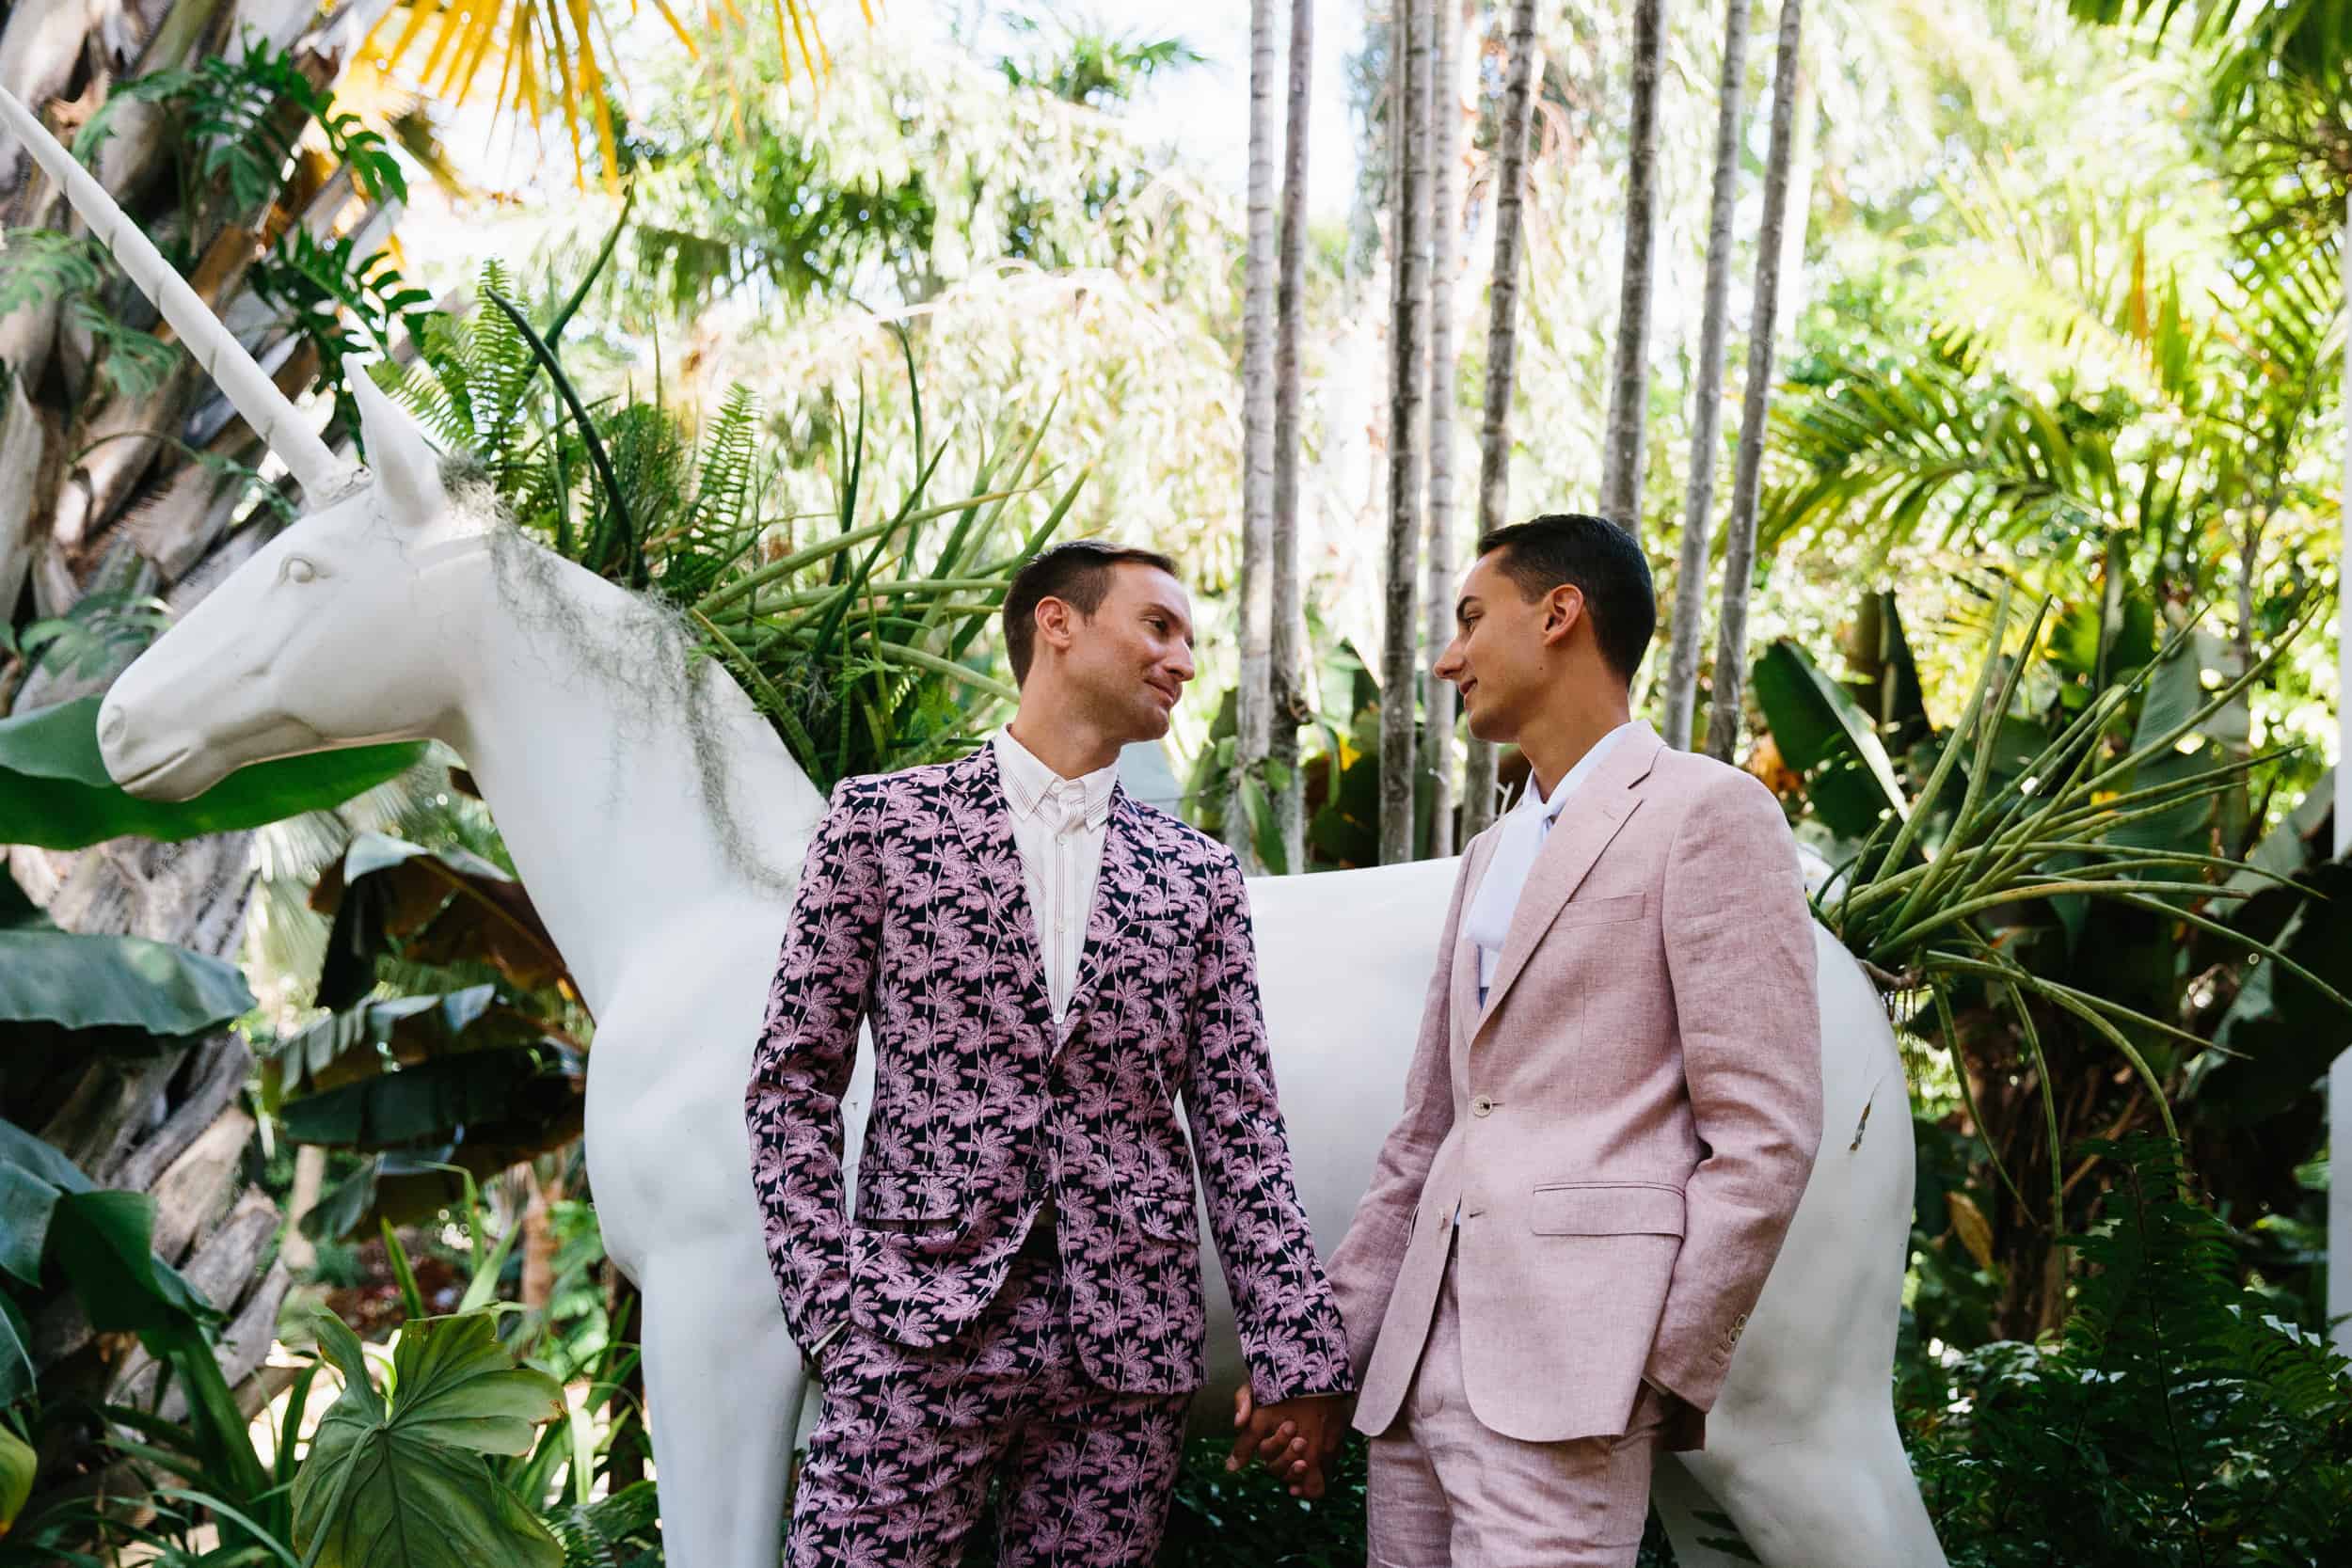 couple wearing colorful suits posing during their wedding